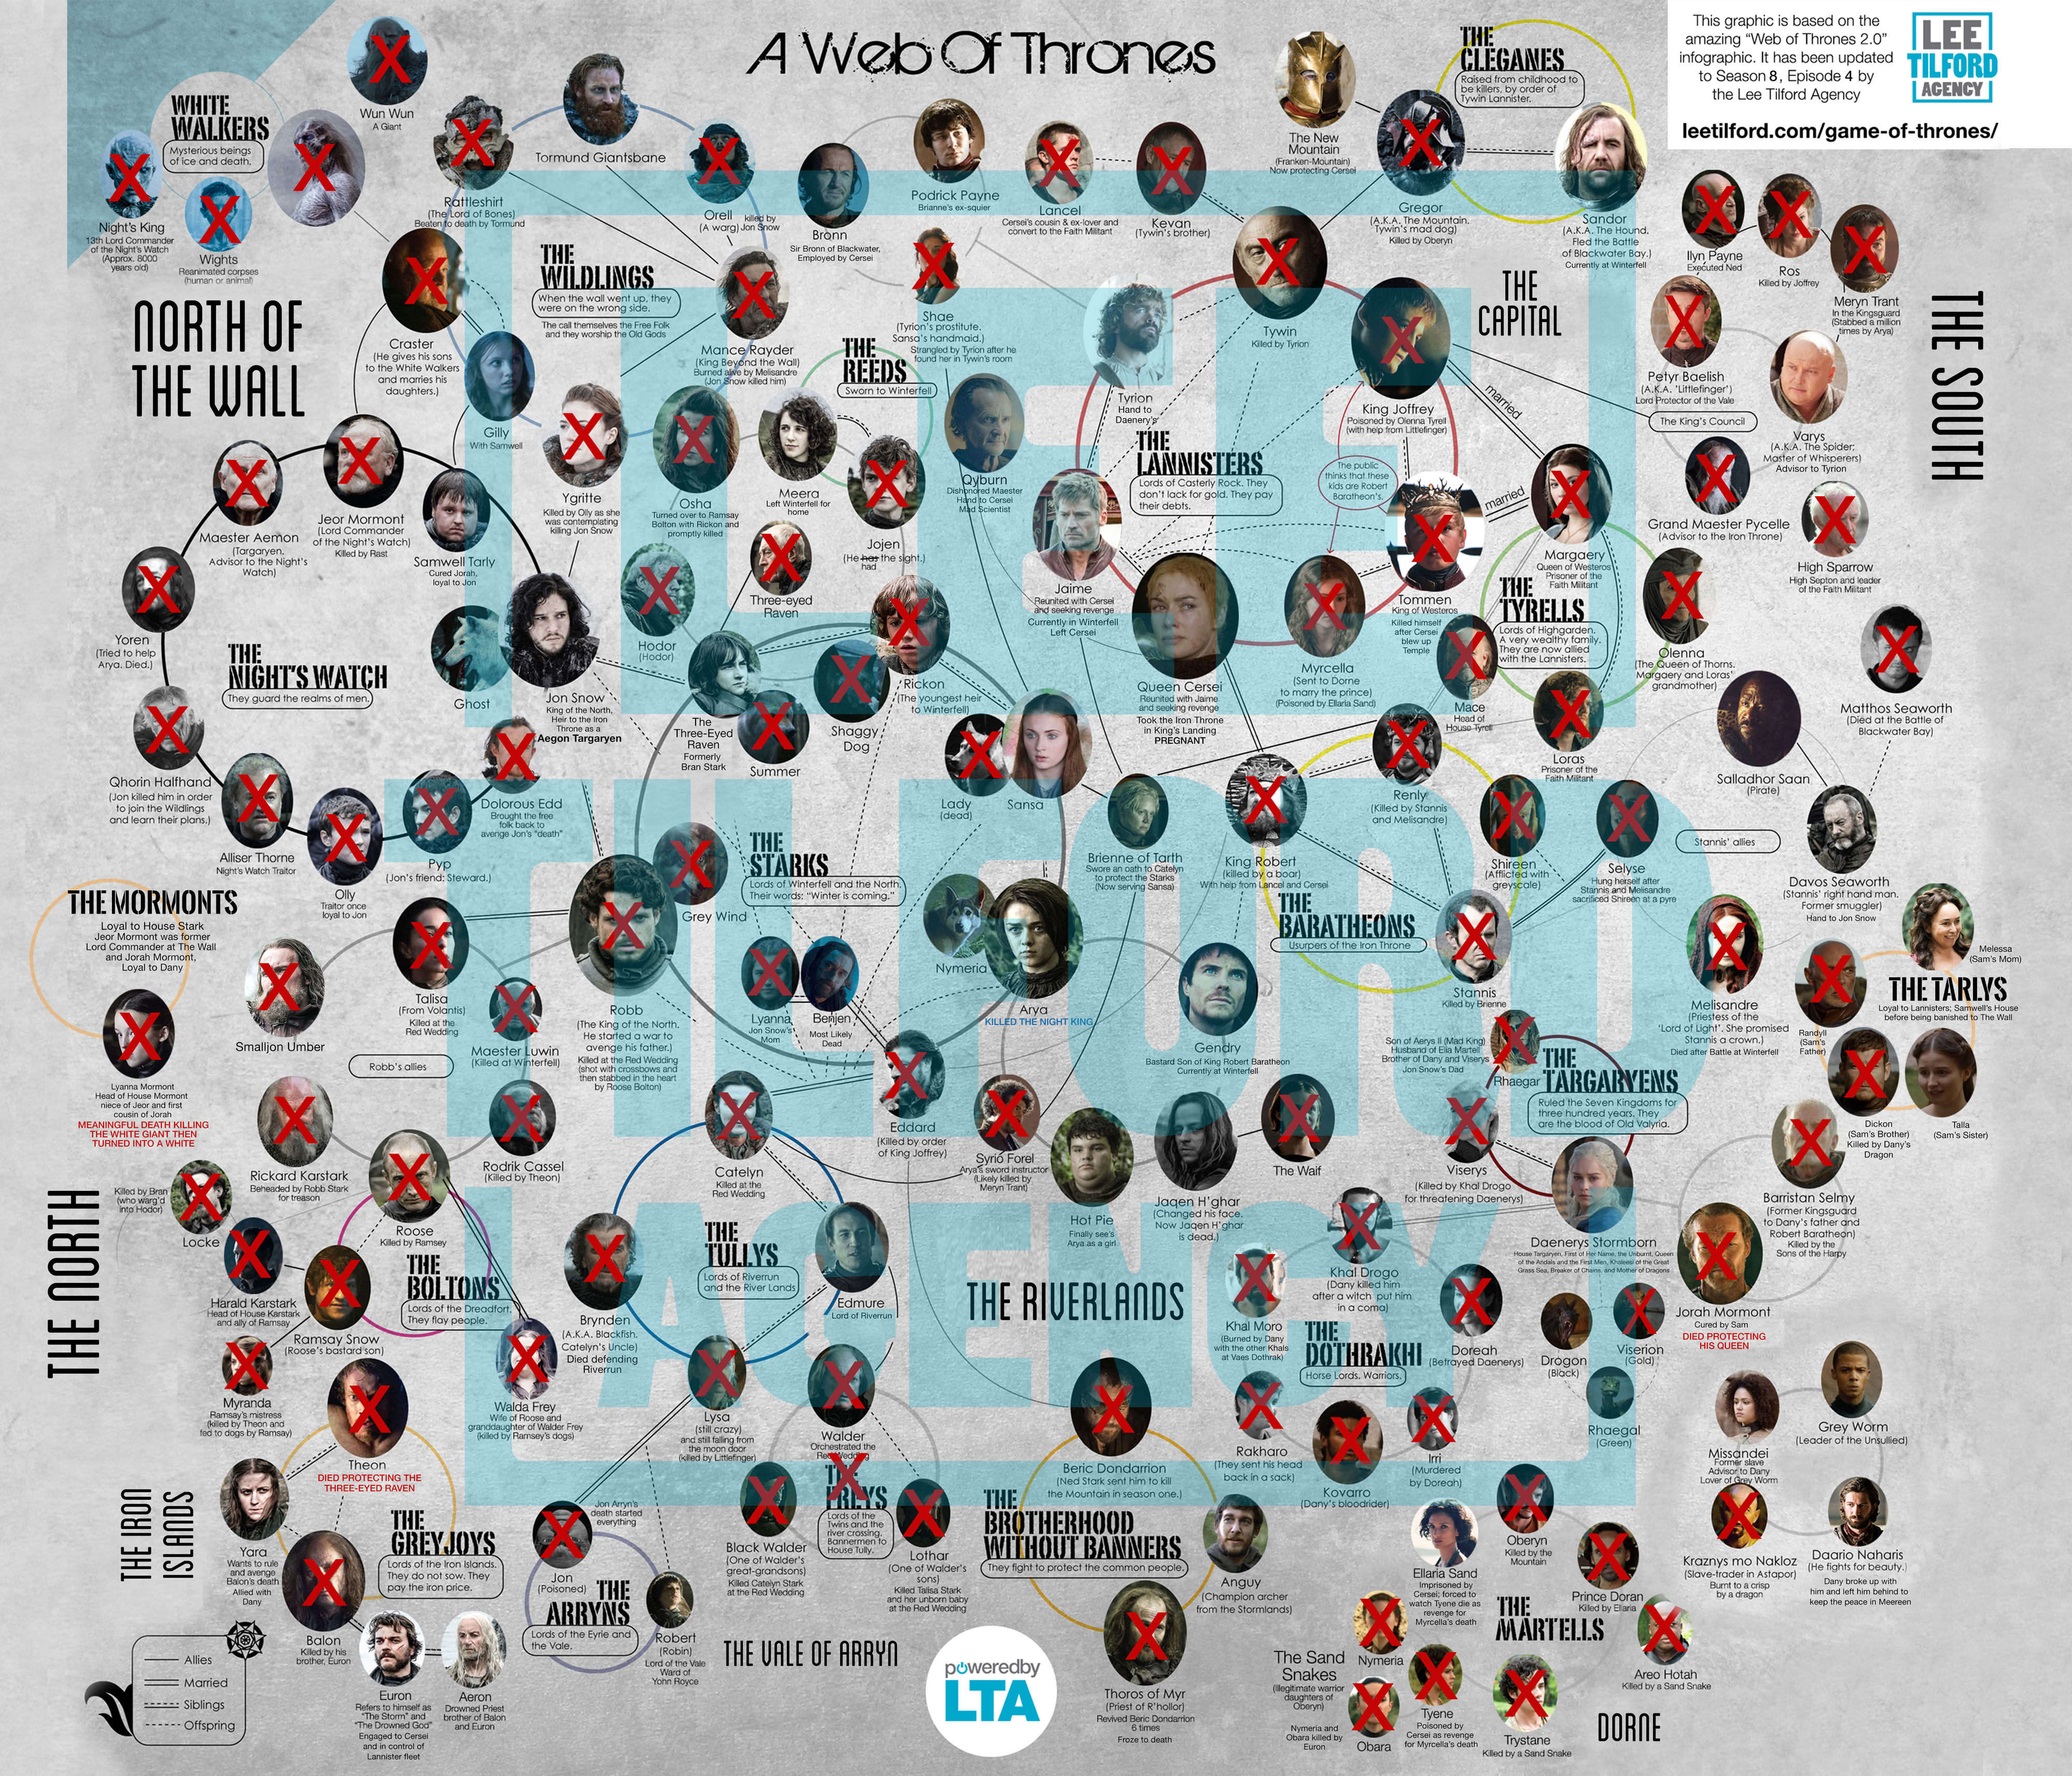 Web of Thrones - Game of Thrones Character Map (SPOILERS)